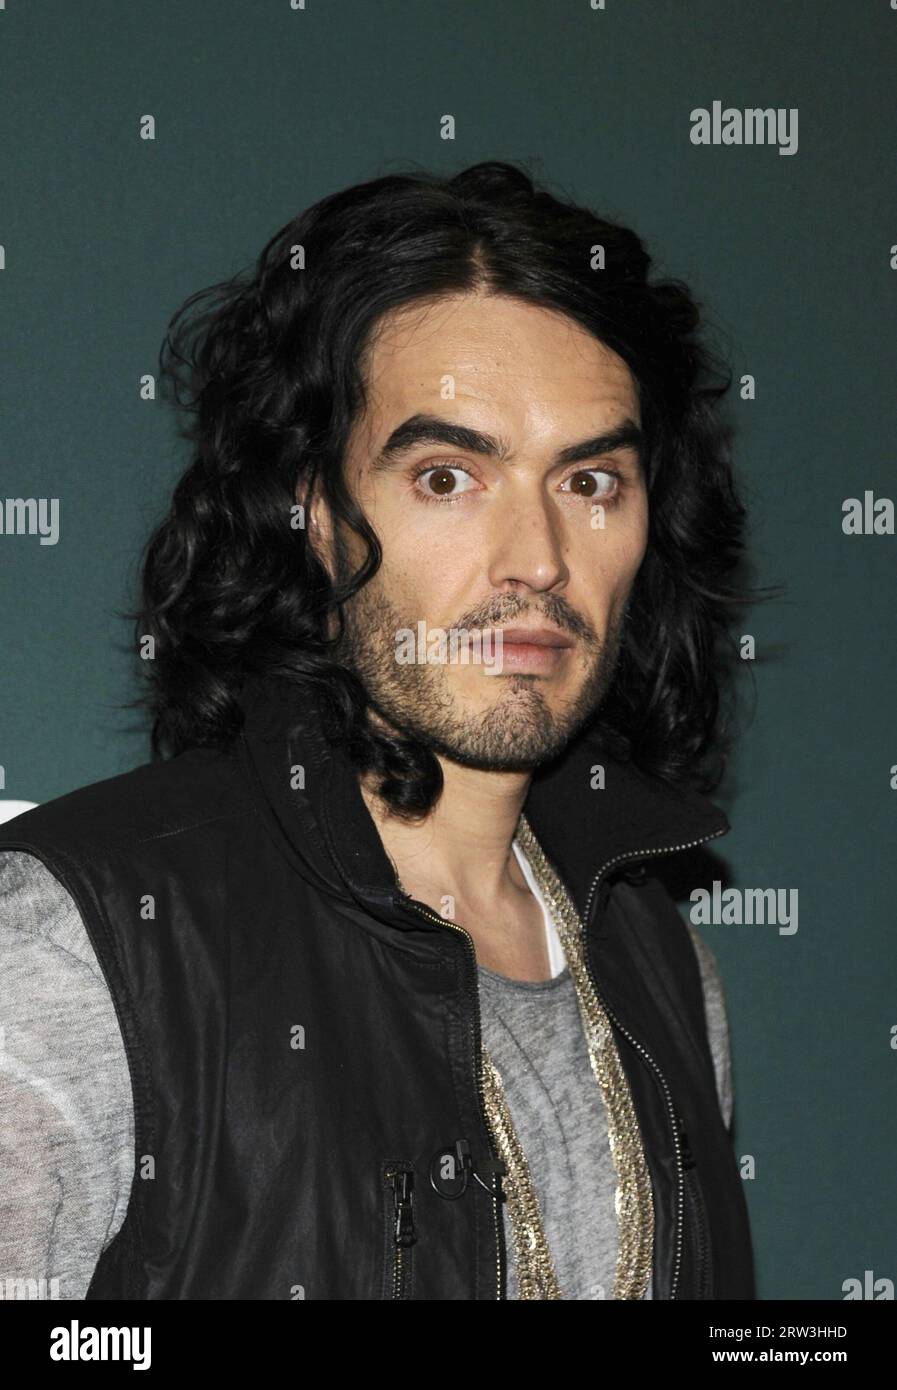 Manhattan, United States Of America. 13th Oct, 2010. NEW YORK - OCTOBER 13: Actor/comedian Russell Brand signs copies of his latest book 'Booky Wook 2' at Barnes & Noble Union Square on October 13, 2010 in New York City. People: Russell Brand Credit: Storms Media Group/Alamy Live News Stock Photo